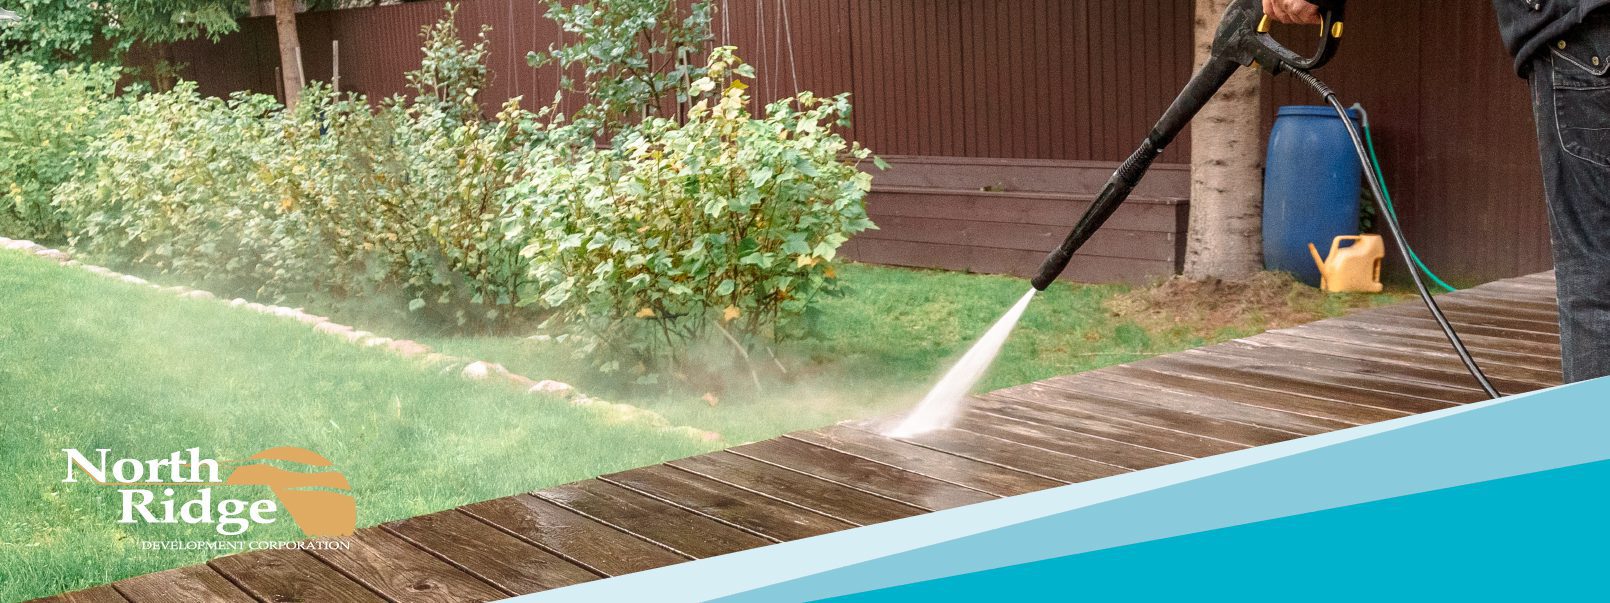 a man is using a pressure washer on a deck.